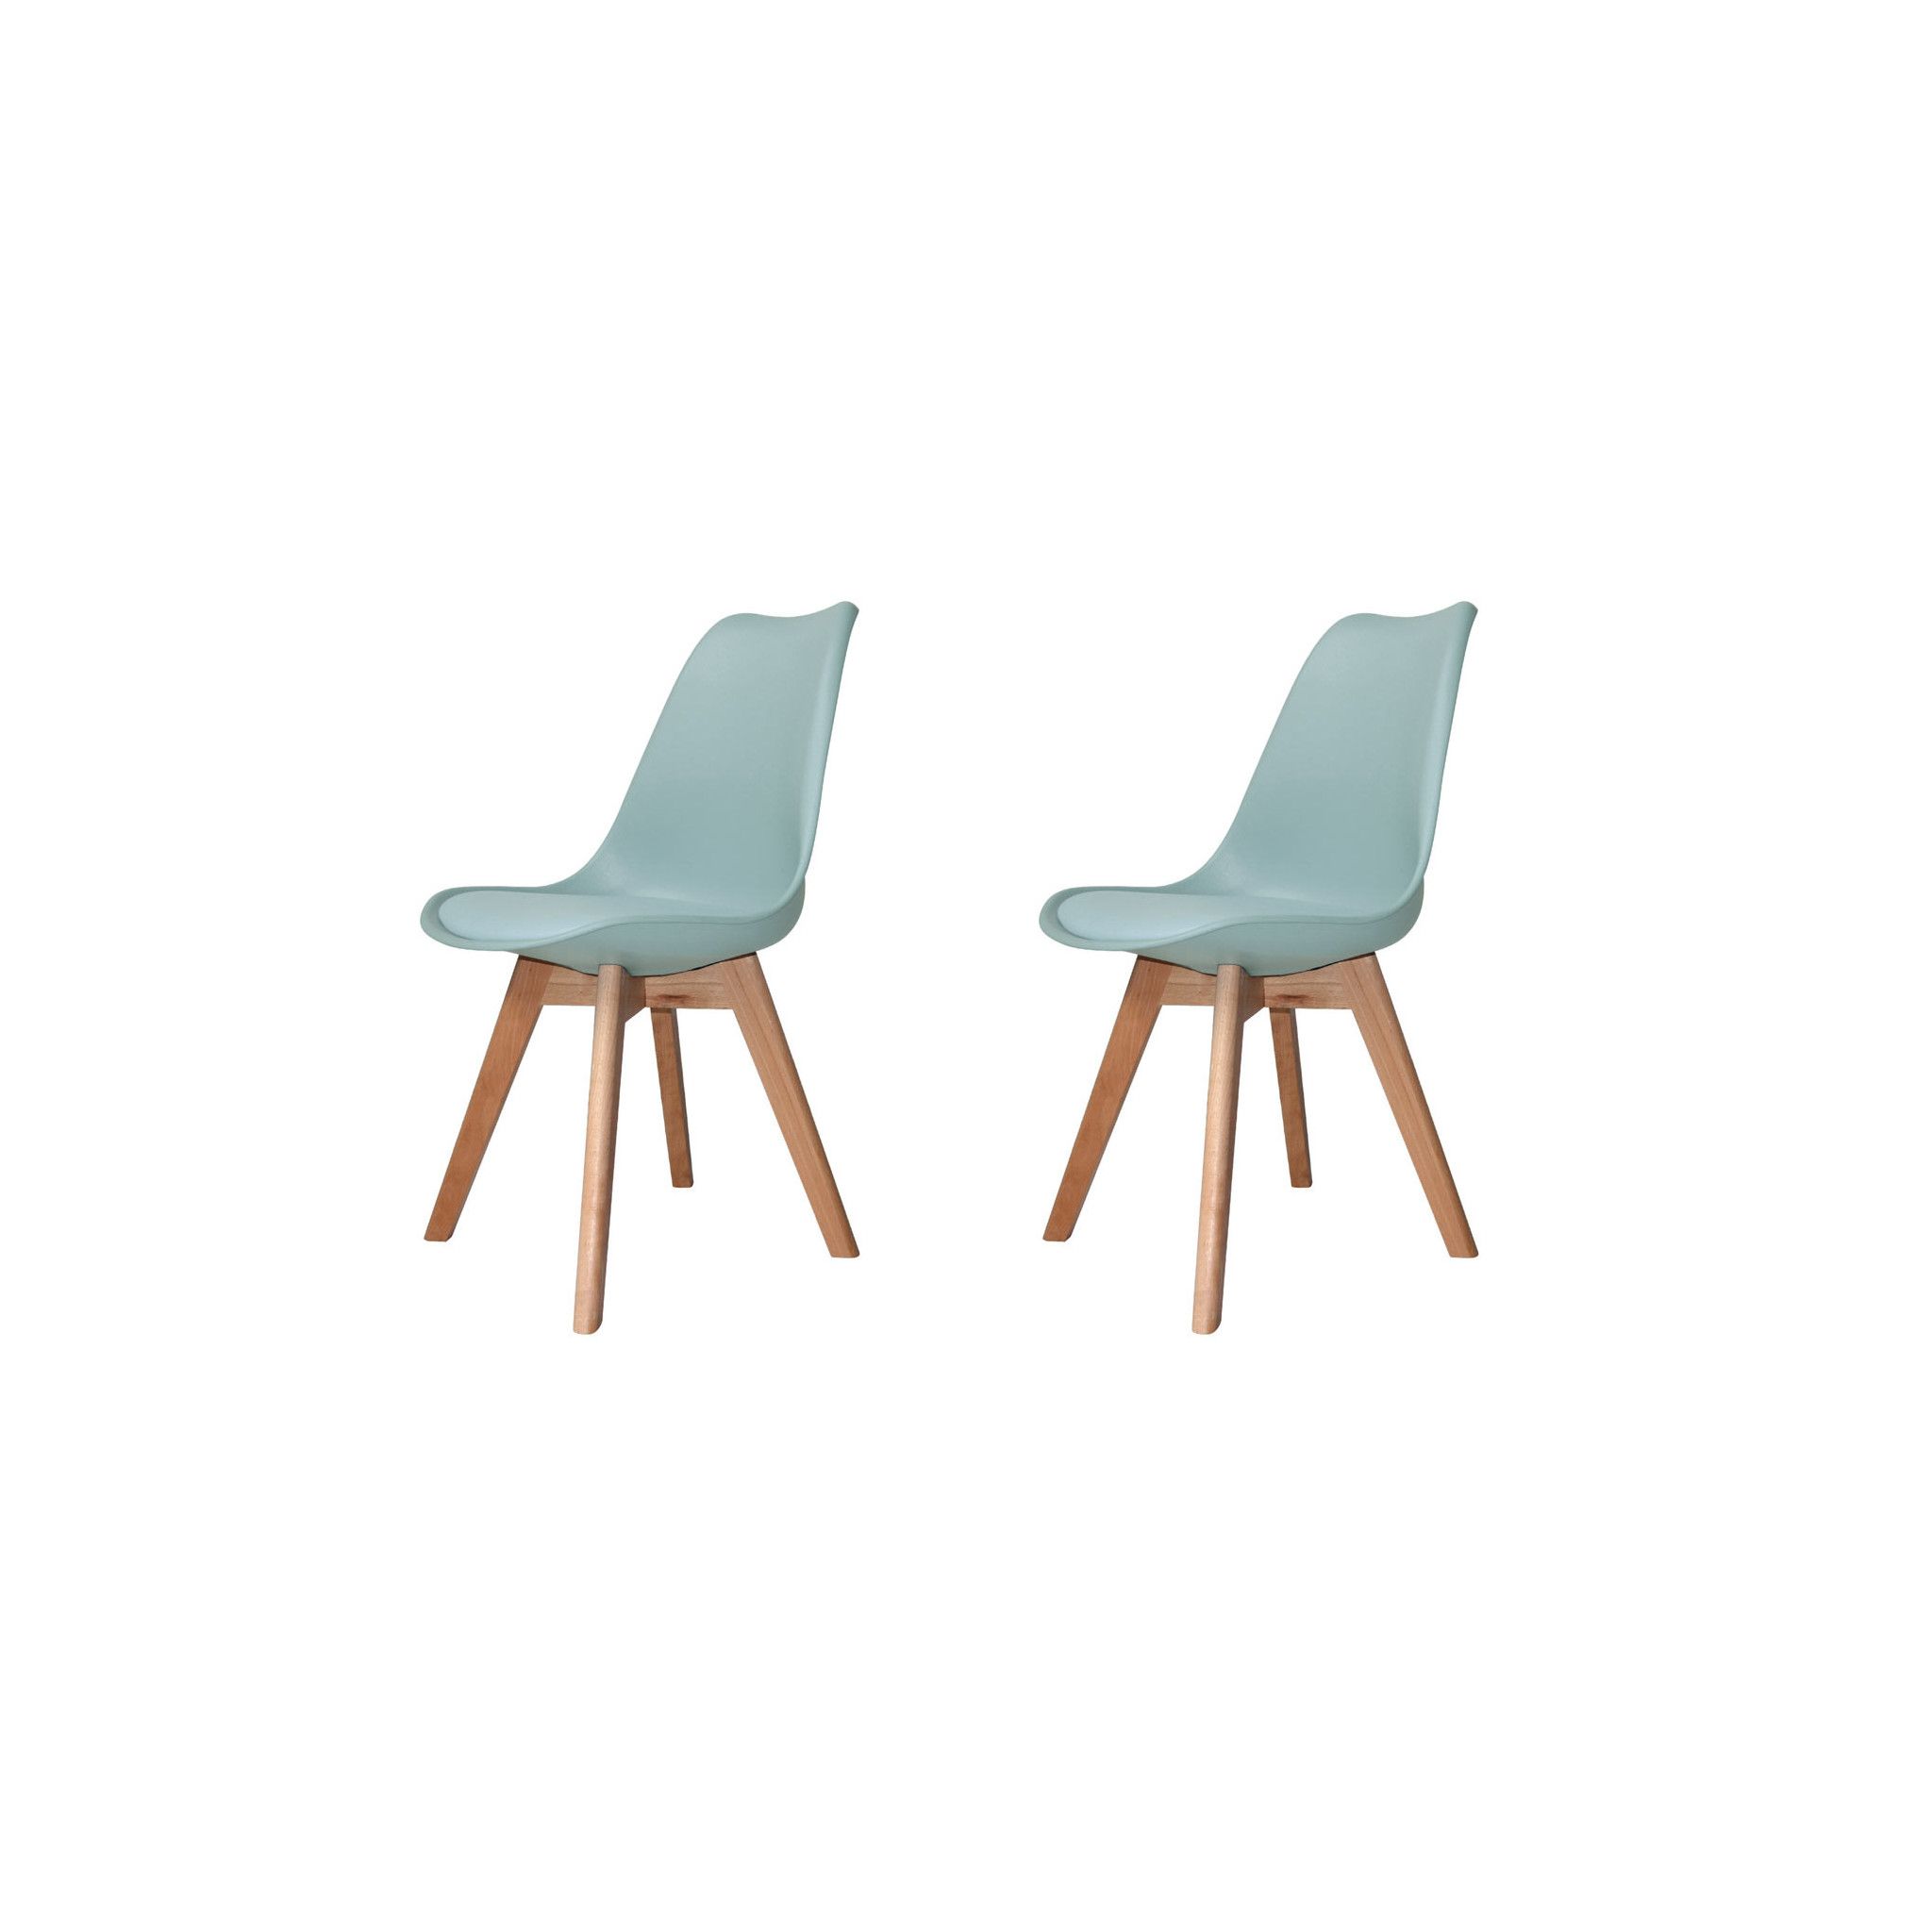 PACK 2 SILLAS NEW TOWER WOOD AGUAMARINA EXTRA QUALITY - Packs de Chaises 